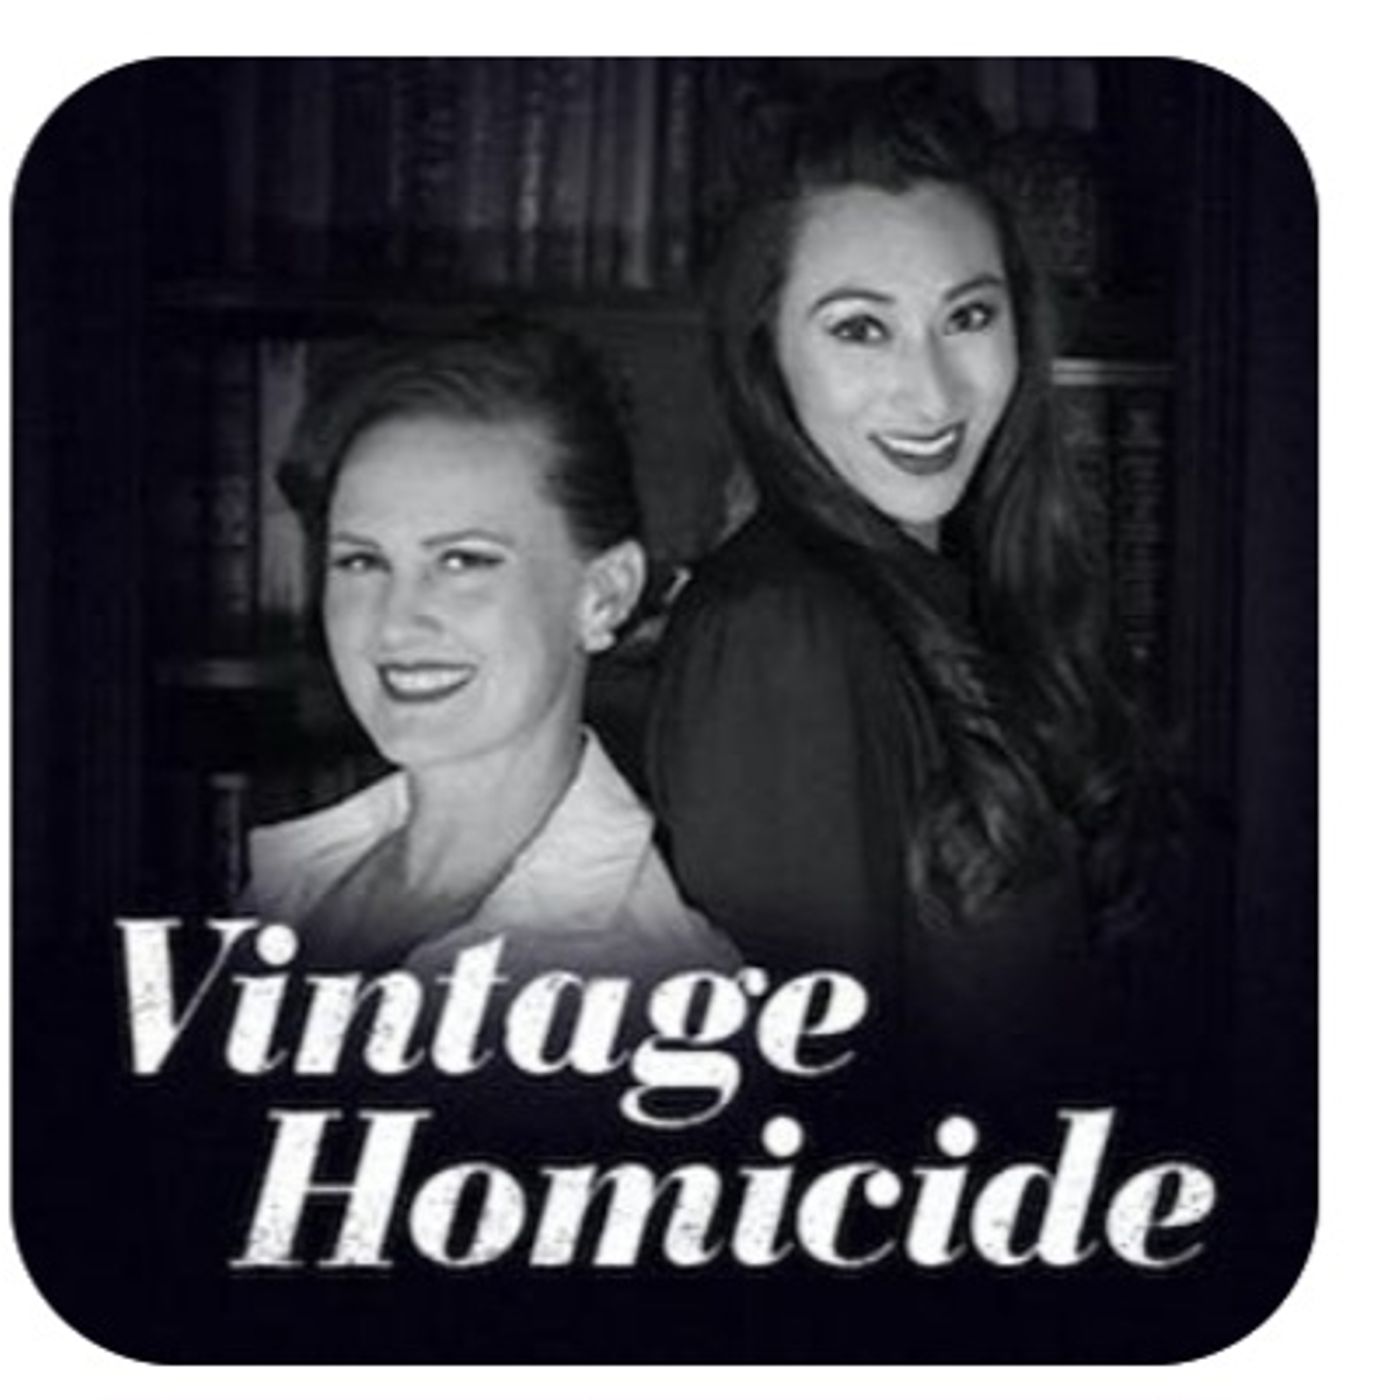 Cell Block Tango by Vintage Homicide